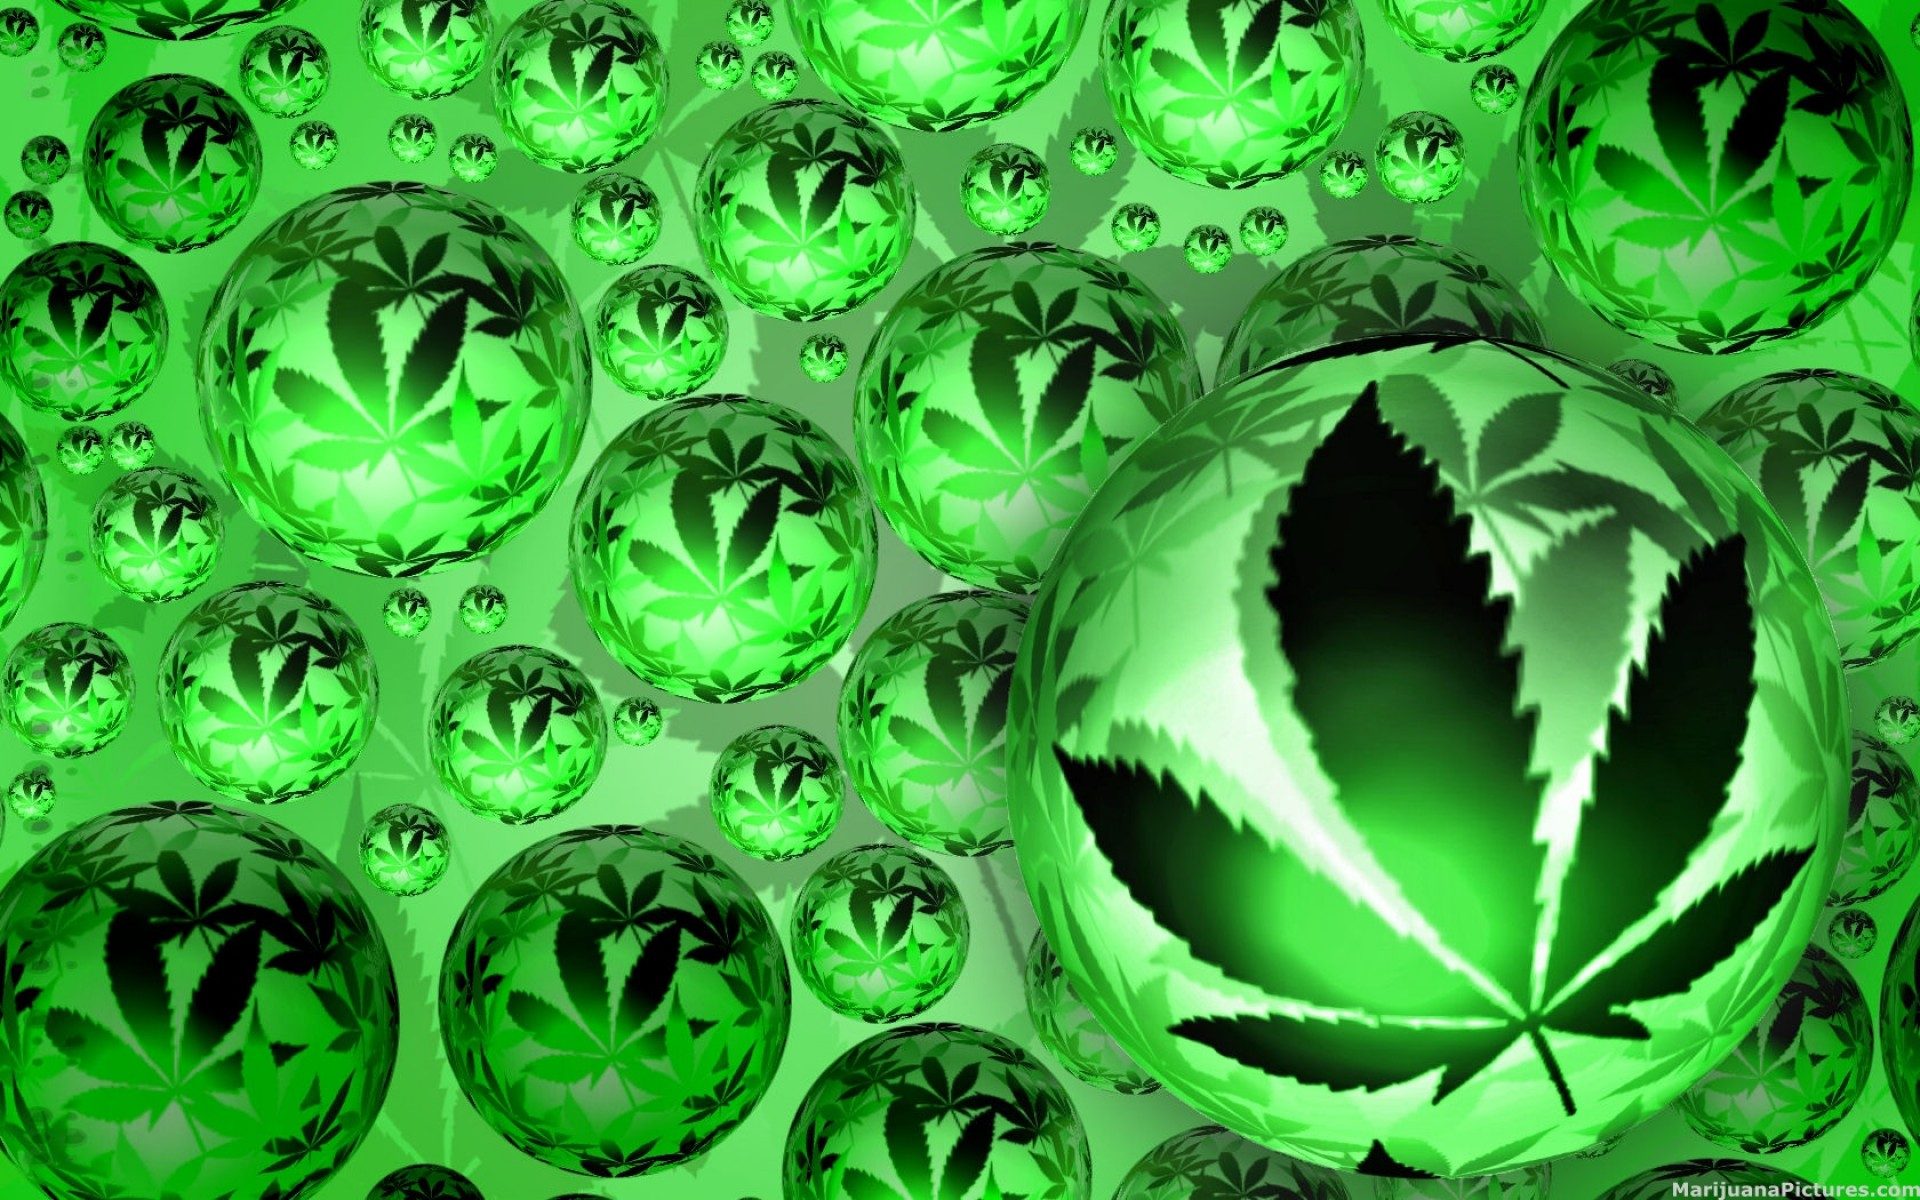 Marijuana Weed 420 T Neat Image For Free - Download hd wallpapers